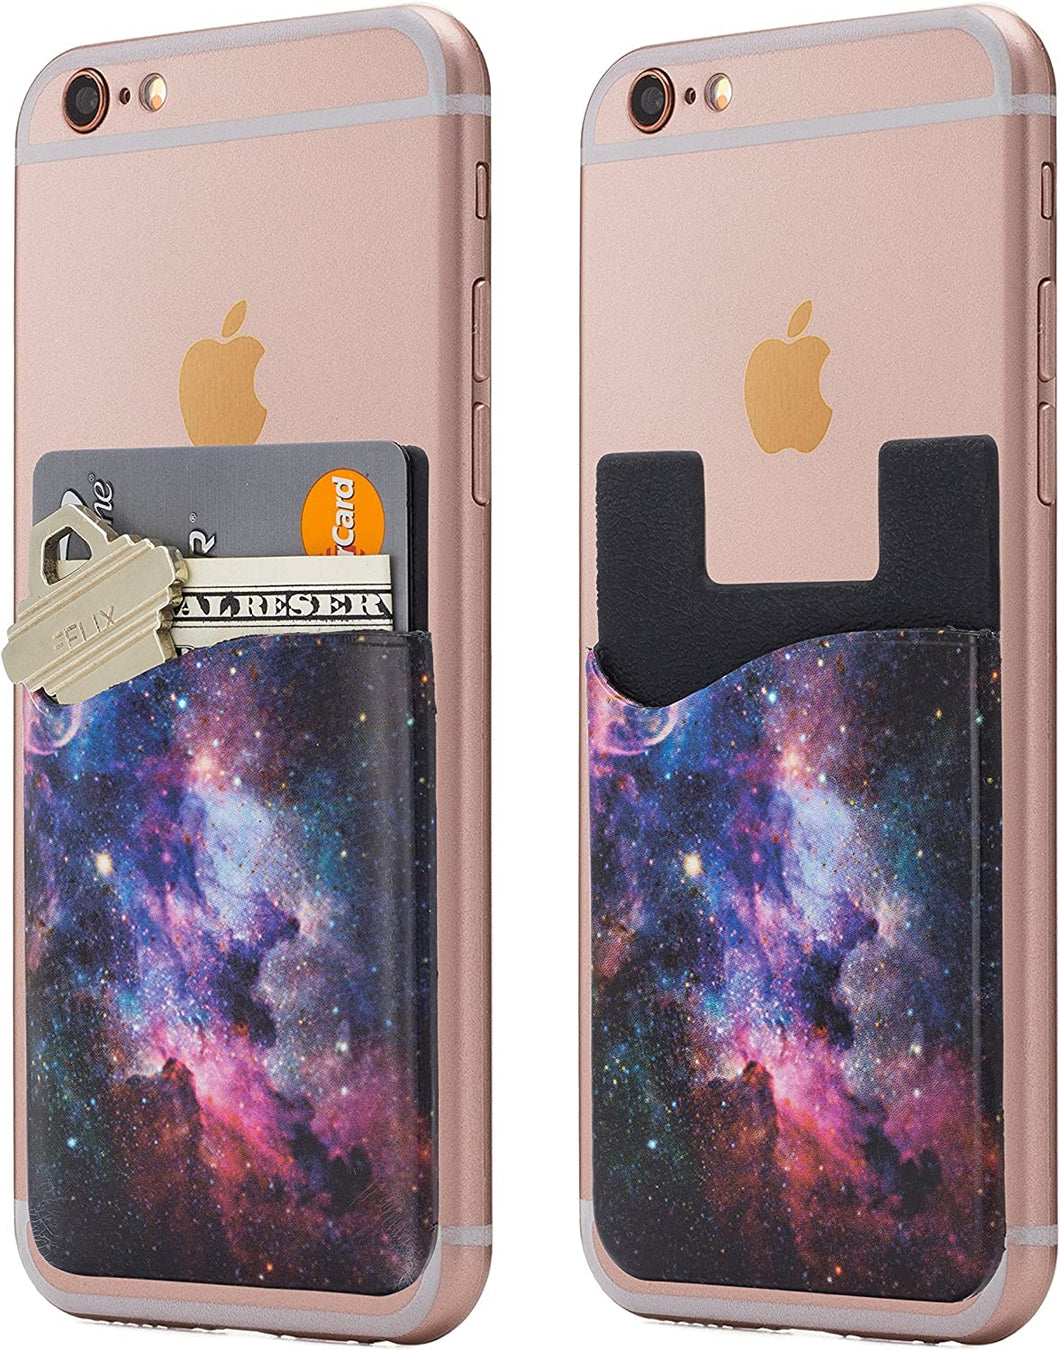 (Two) Galaxy cell phone stick on wallet card holder phone pocket for iPhone, Android and all smartphones.